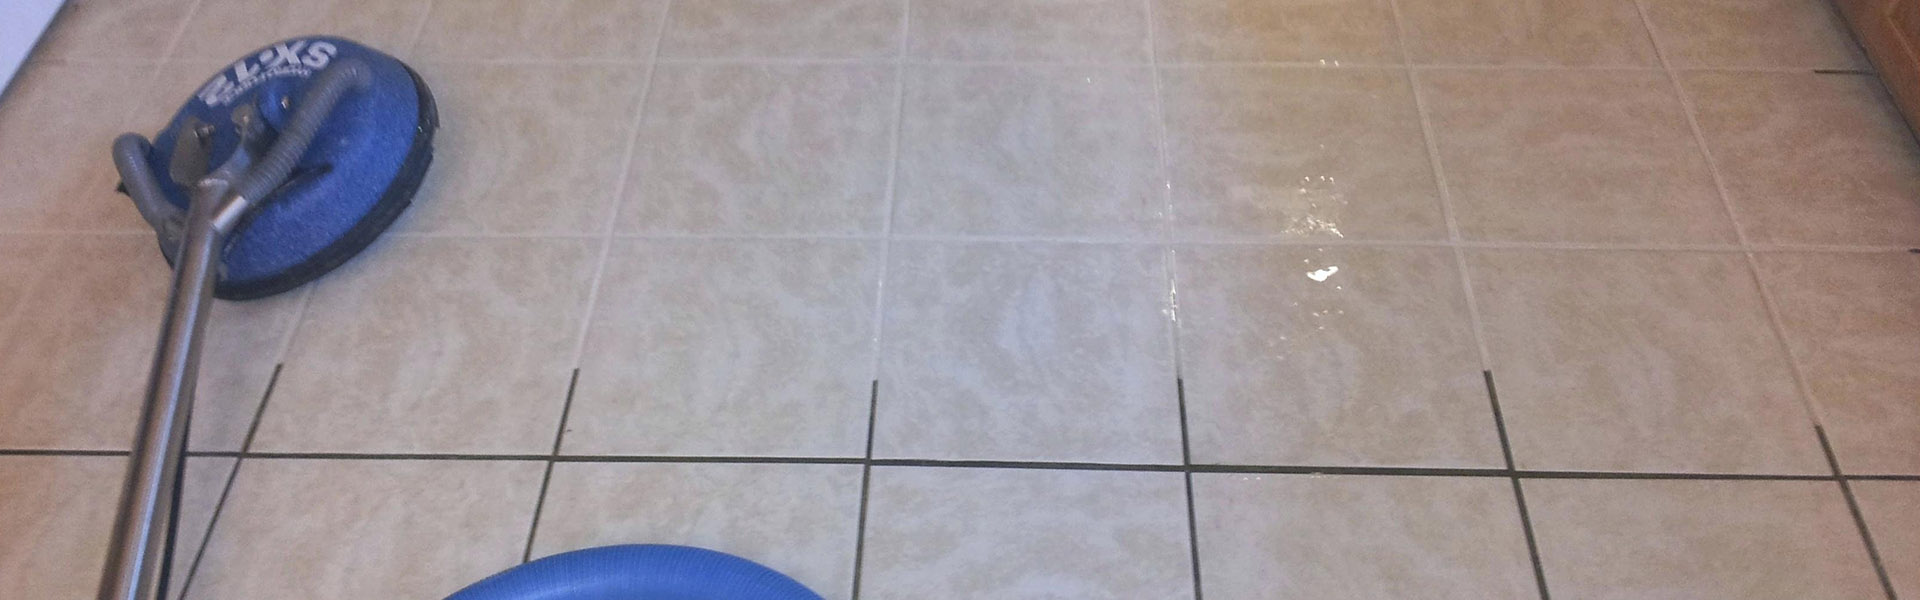 https://www.sunsetcarpetcleaning.net/wp-content/uploads/2020/10/tile-cleaning1.jpg